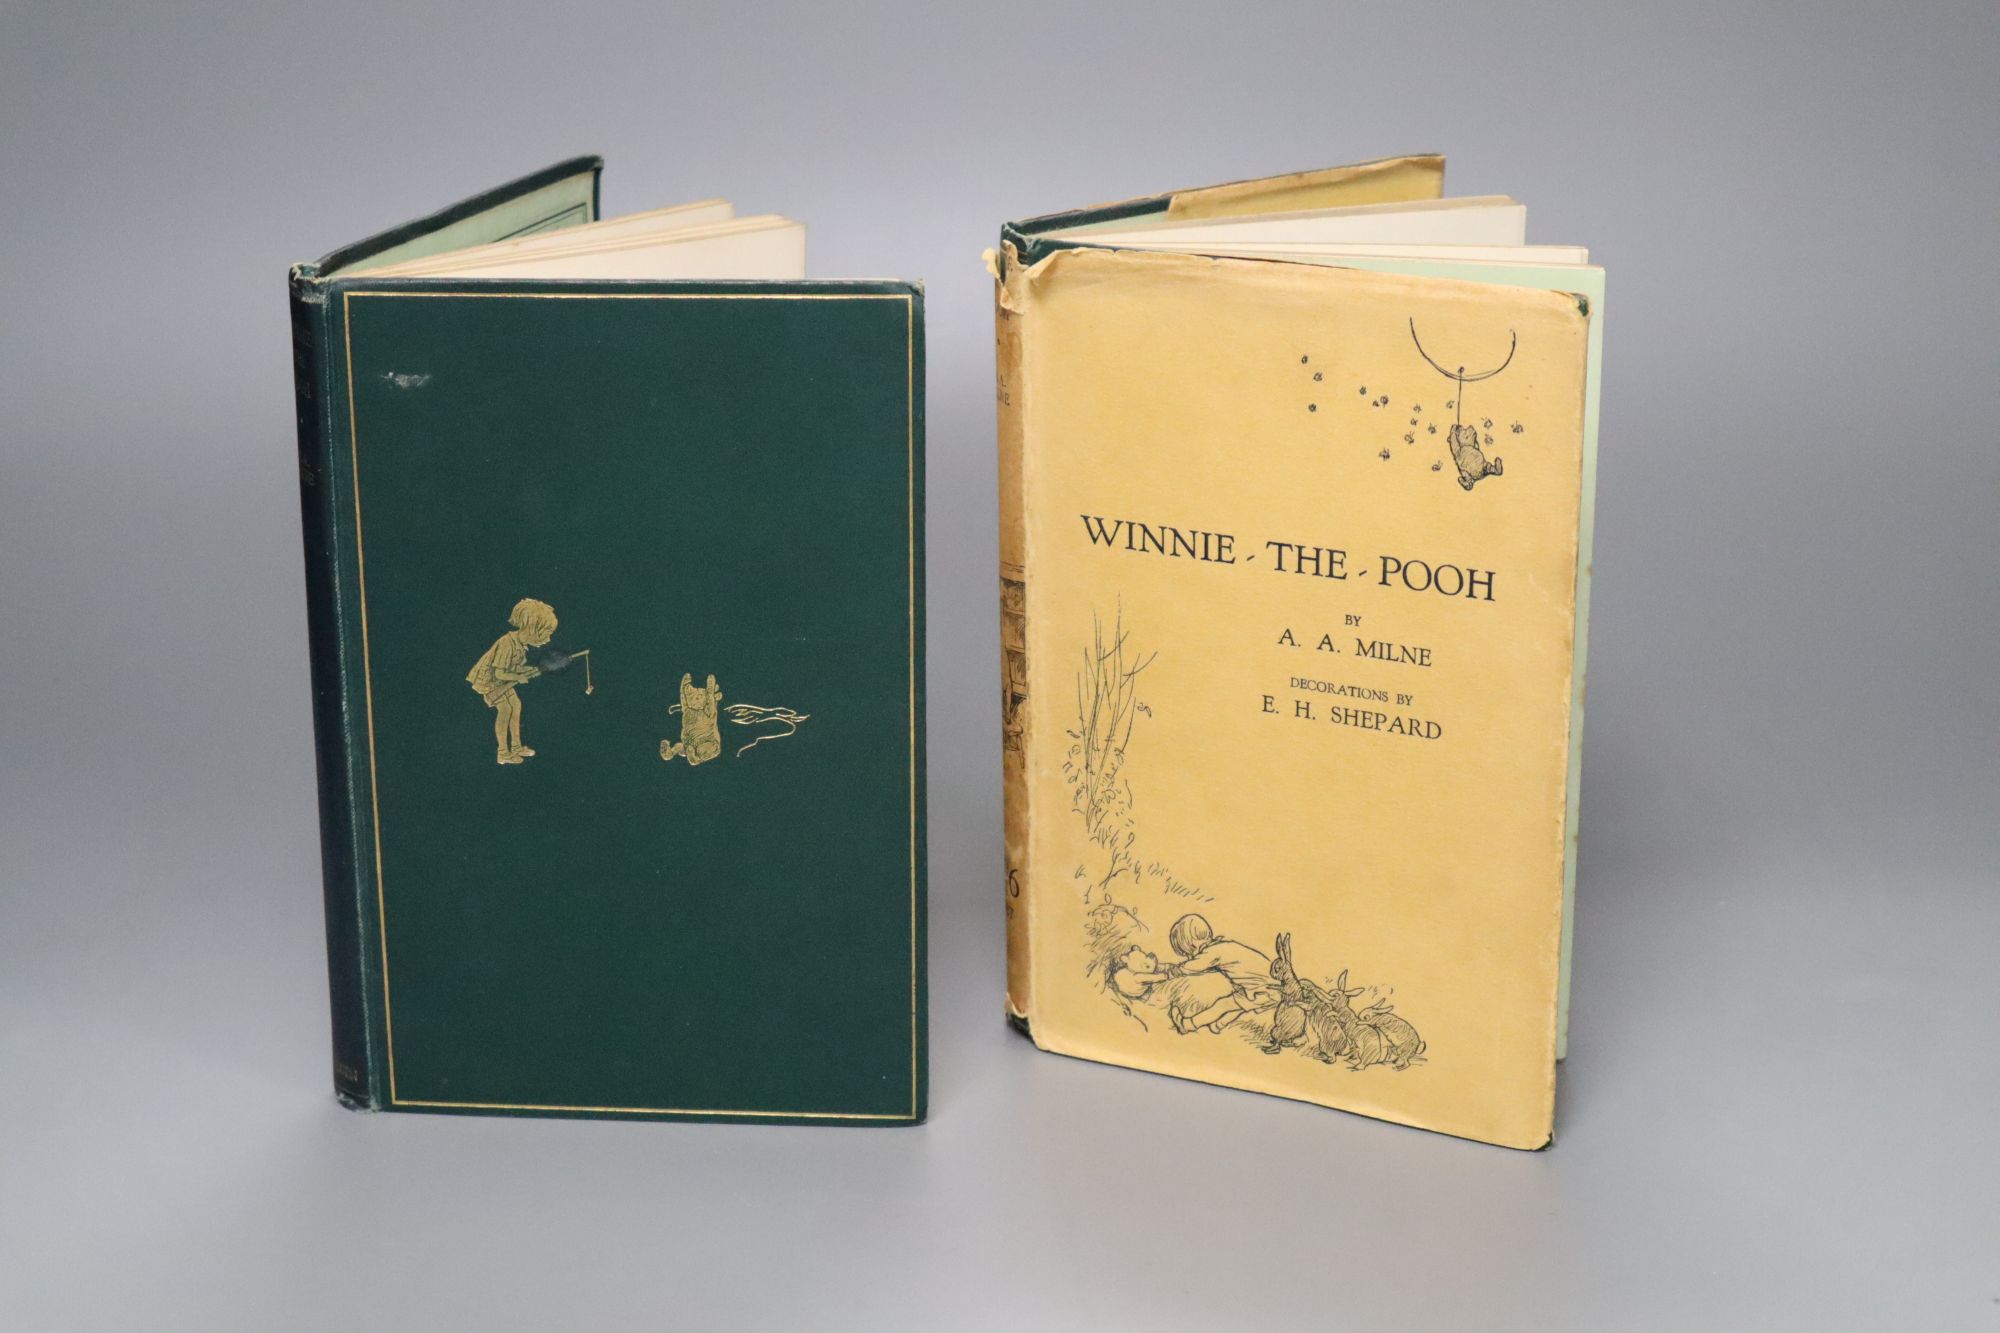 Two Winnie The Pooh books illustrated by E.H. Shepherd